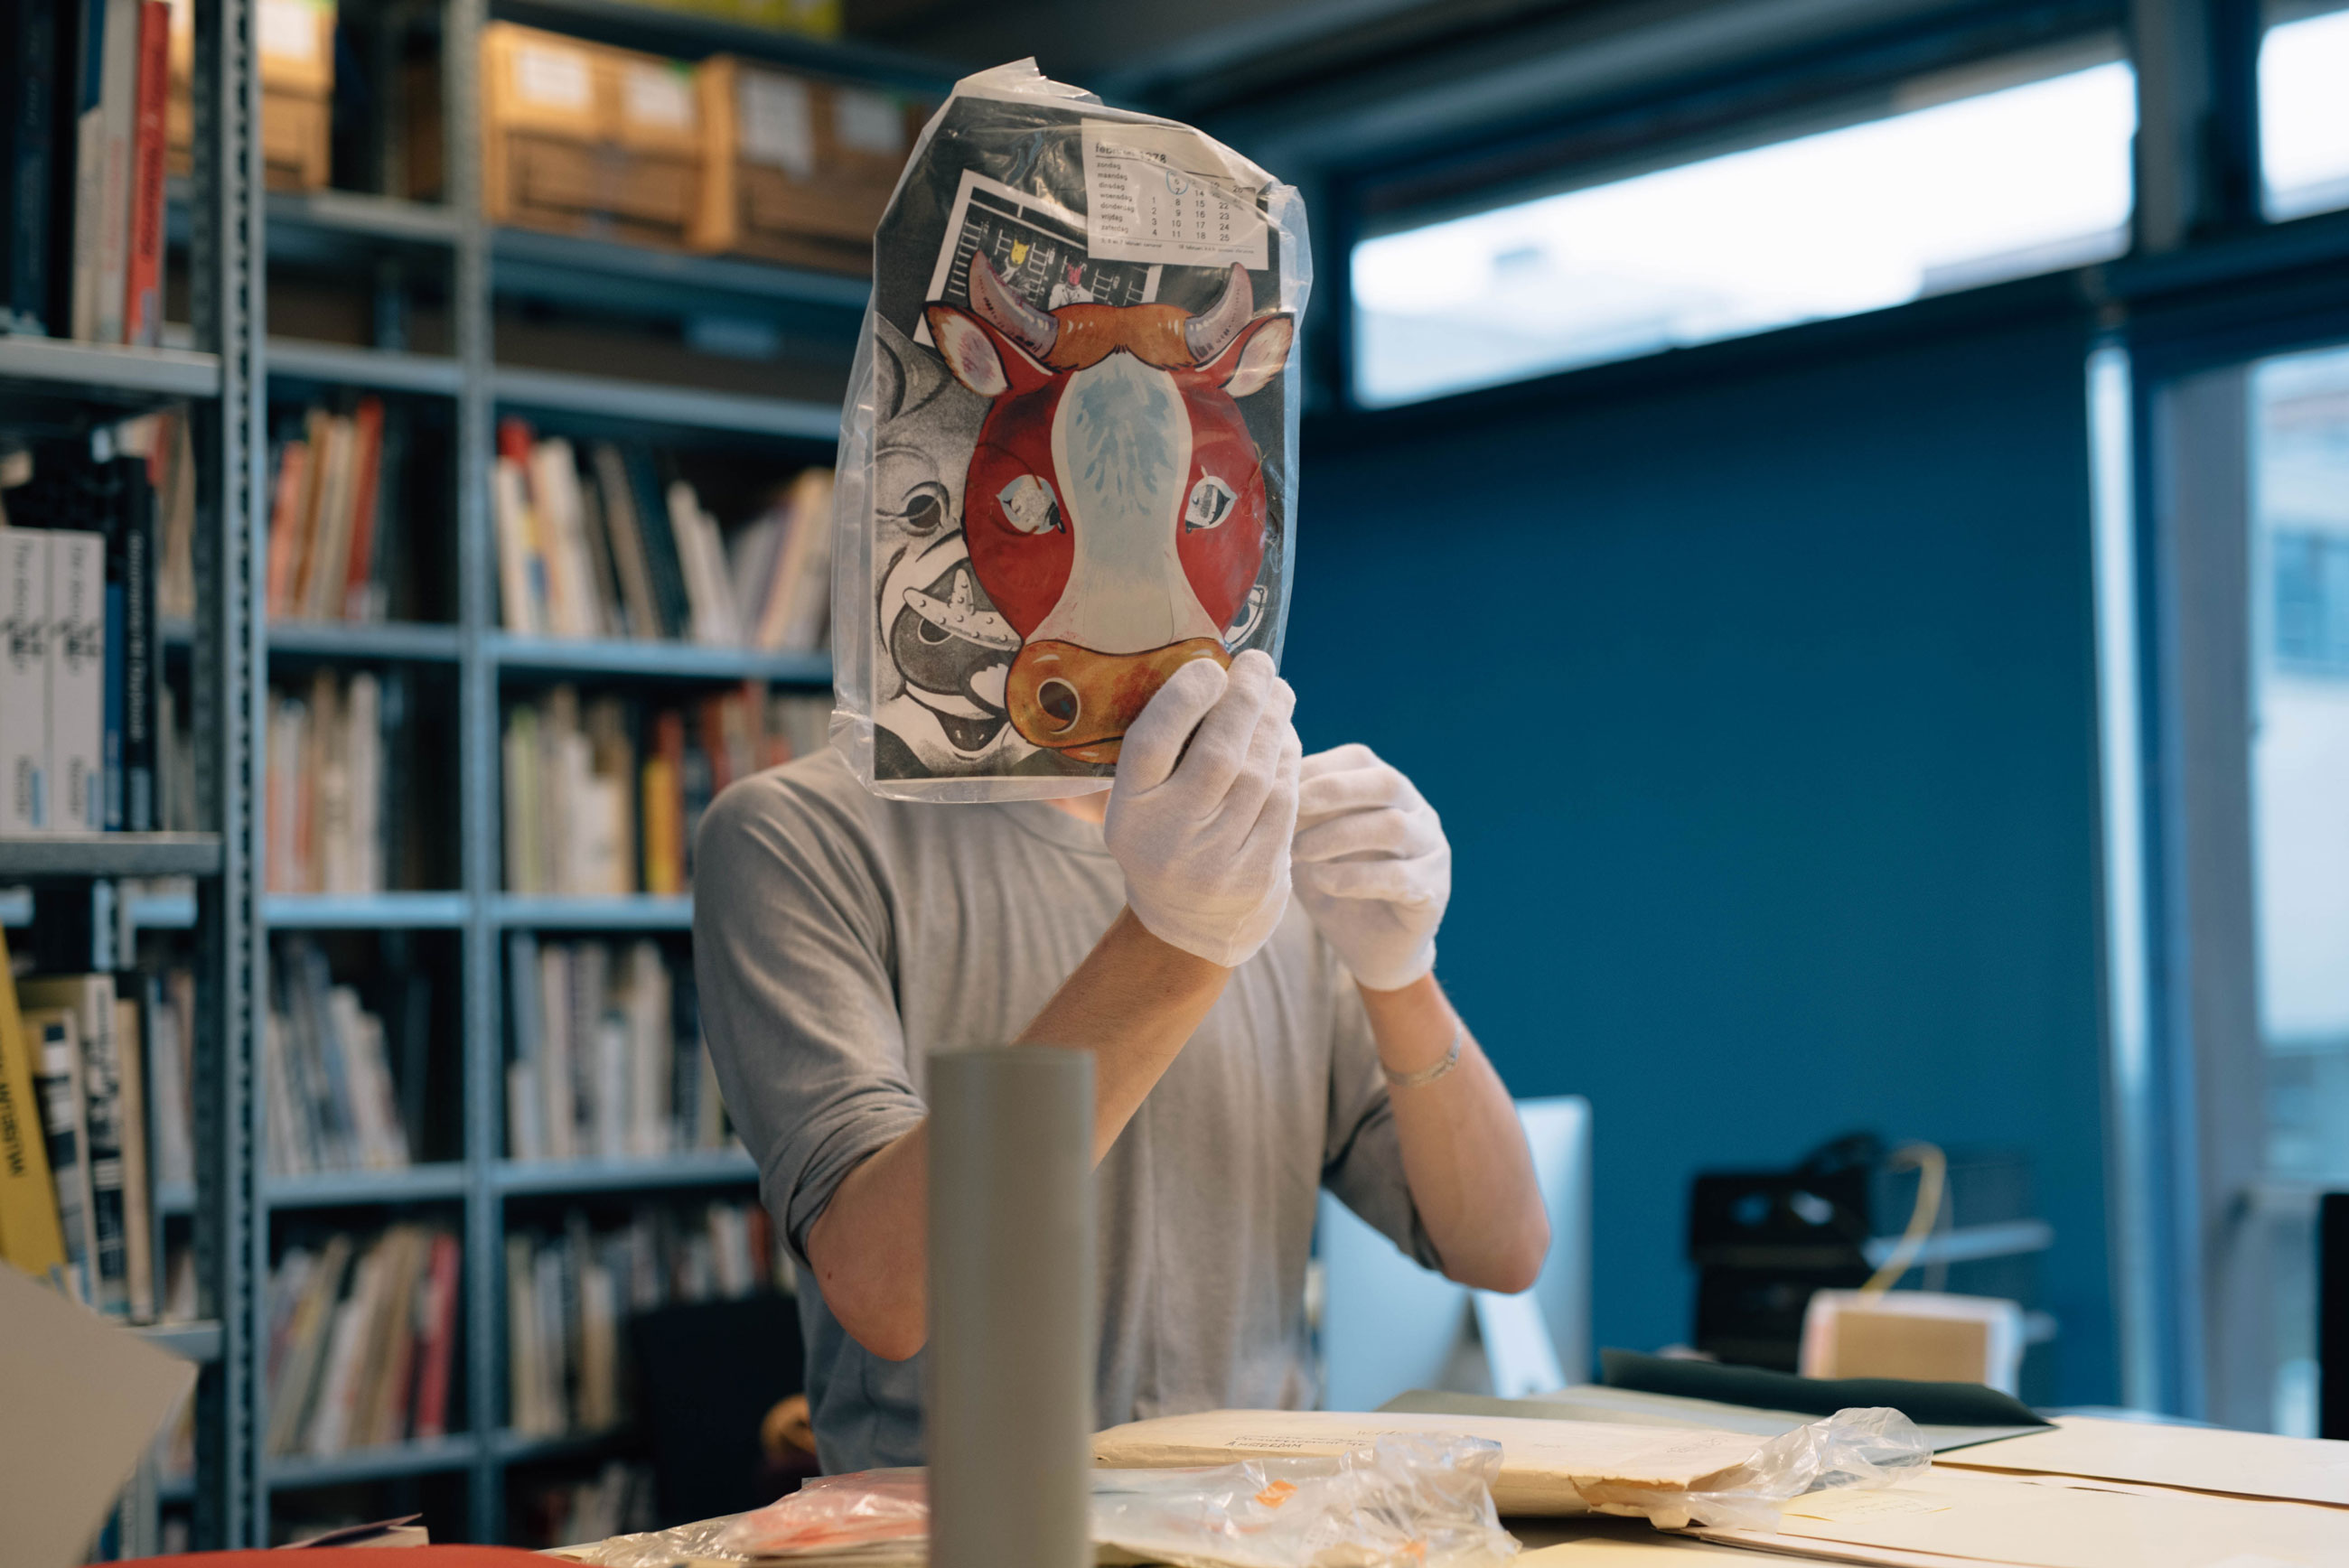 Artist Jan Huskes holding a mask at De Appel's Archive, part of the project Landscape with Bear, curated by the De Appel Curatorial Programme.